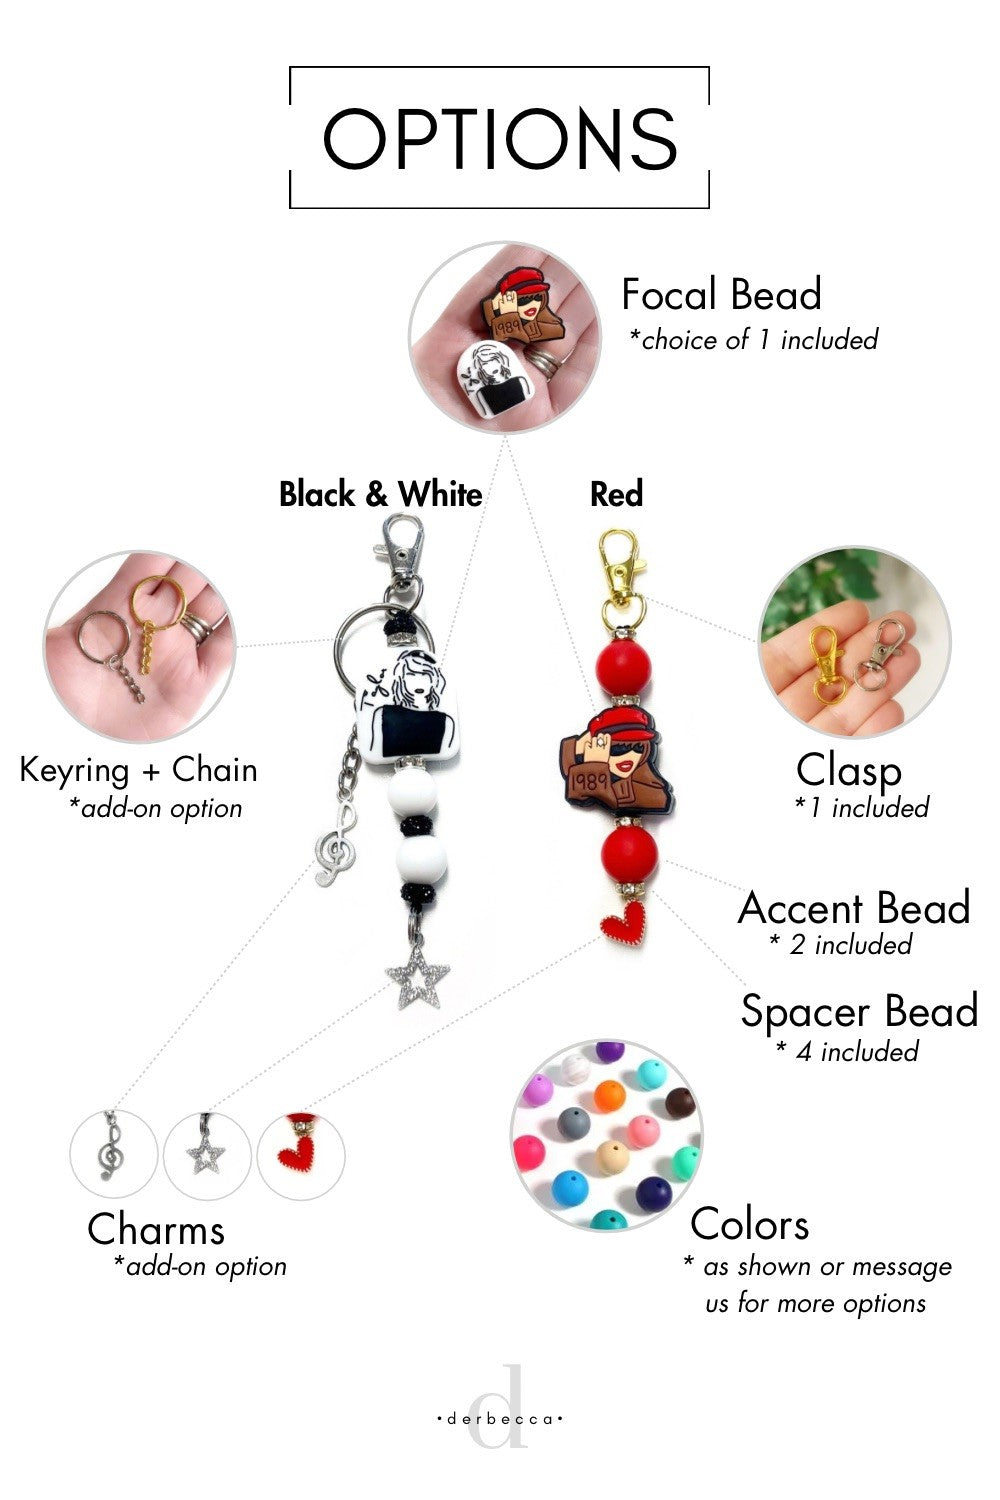 Options to Personalize or Customize Keychain Accessory Colors Hardware Swivel Hook Keyring Chain Charm Tassel Focal Bead Silicone